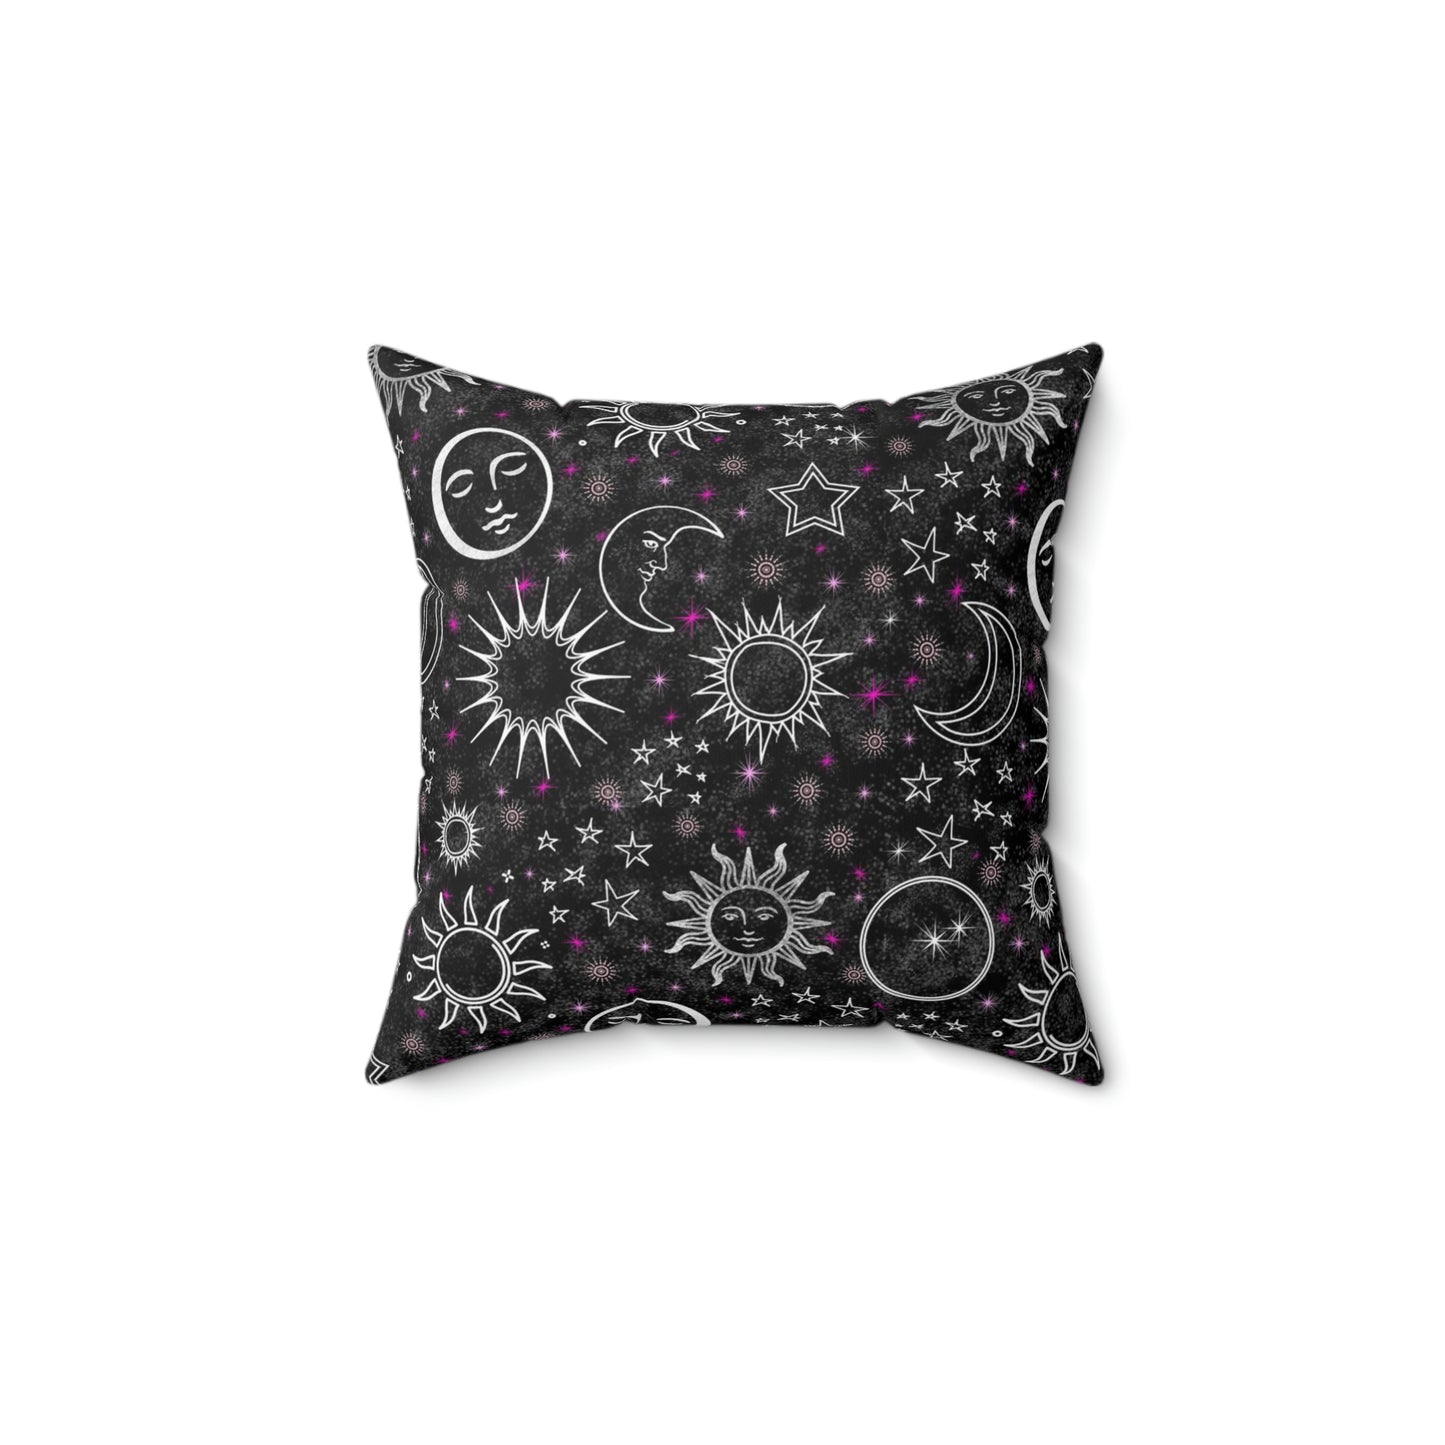 Celestial Black Pink Faux Suede Square Pillow Case With Zipper Suns Moons Stars